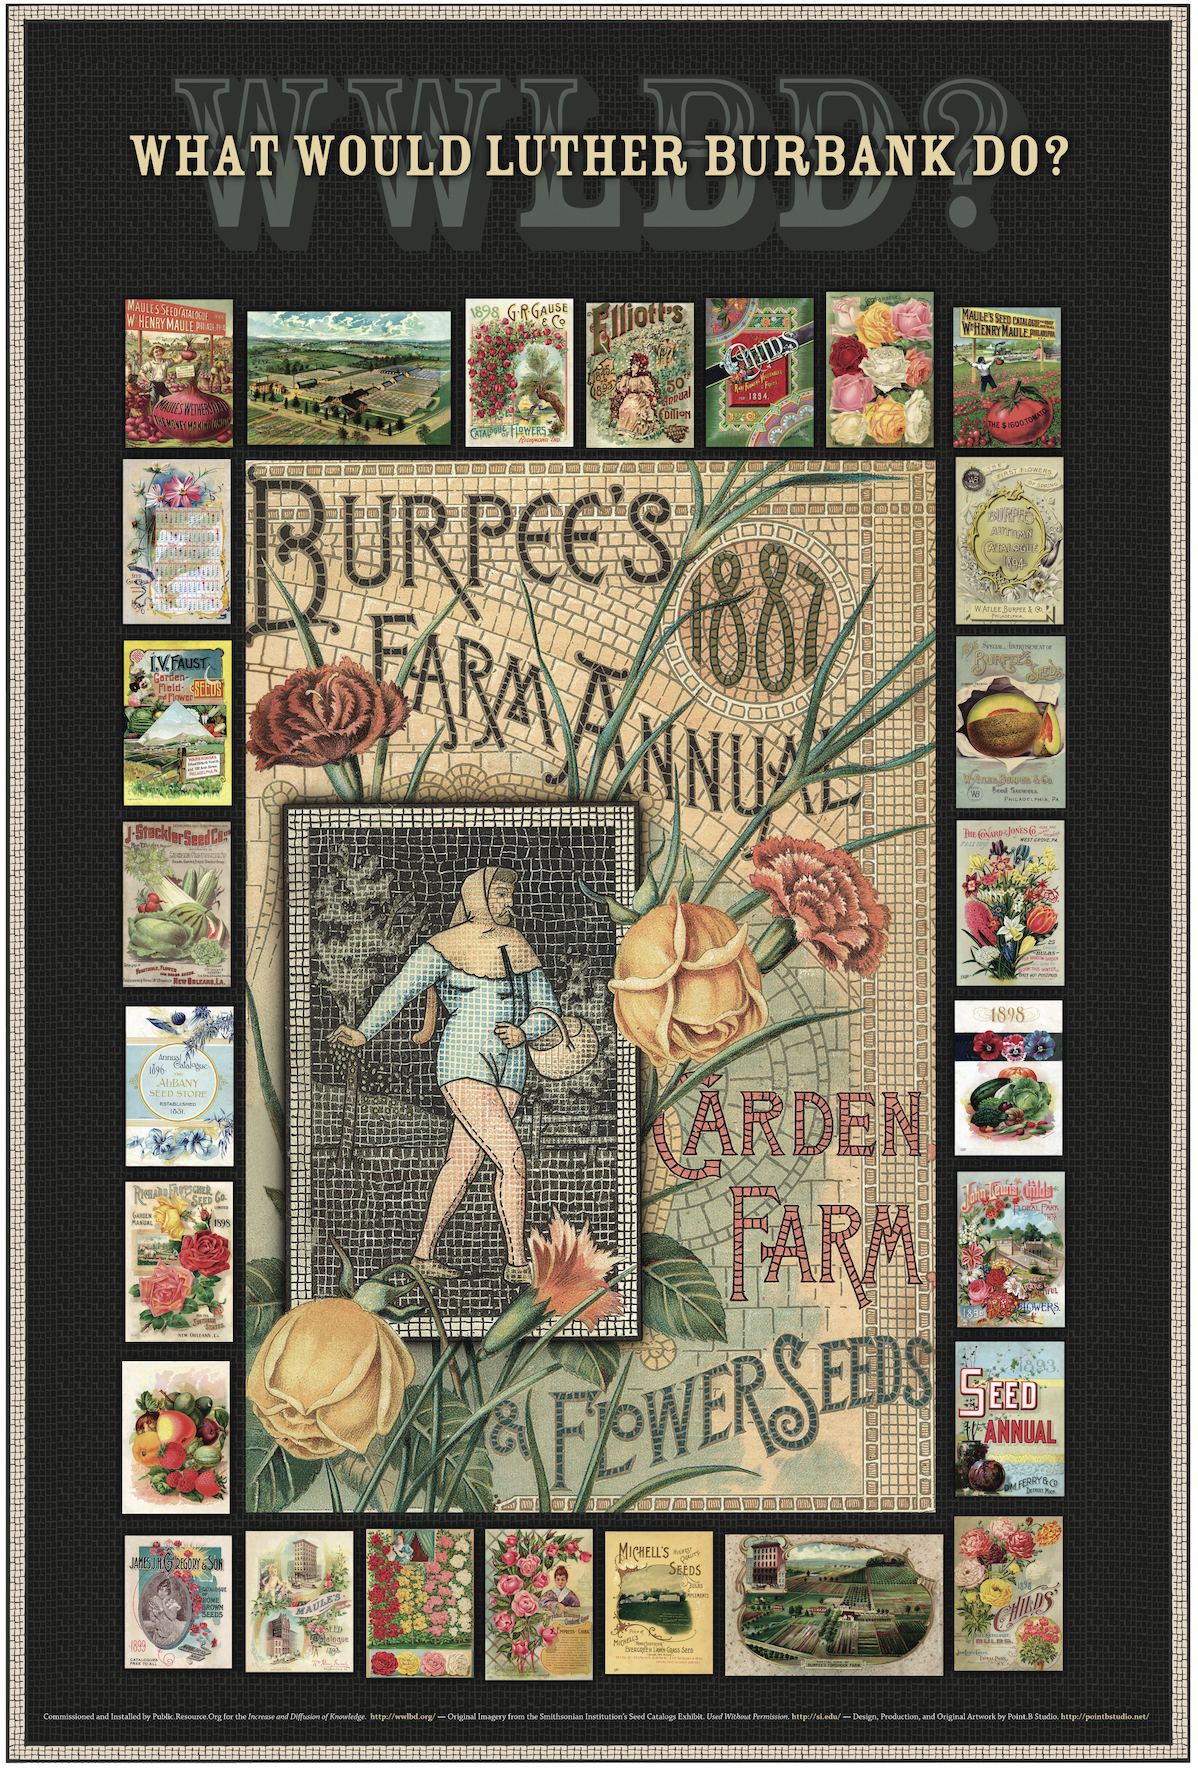 What Would Luther Burbank Do — Poster 1